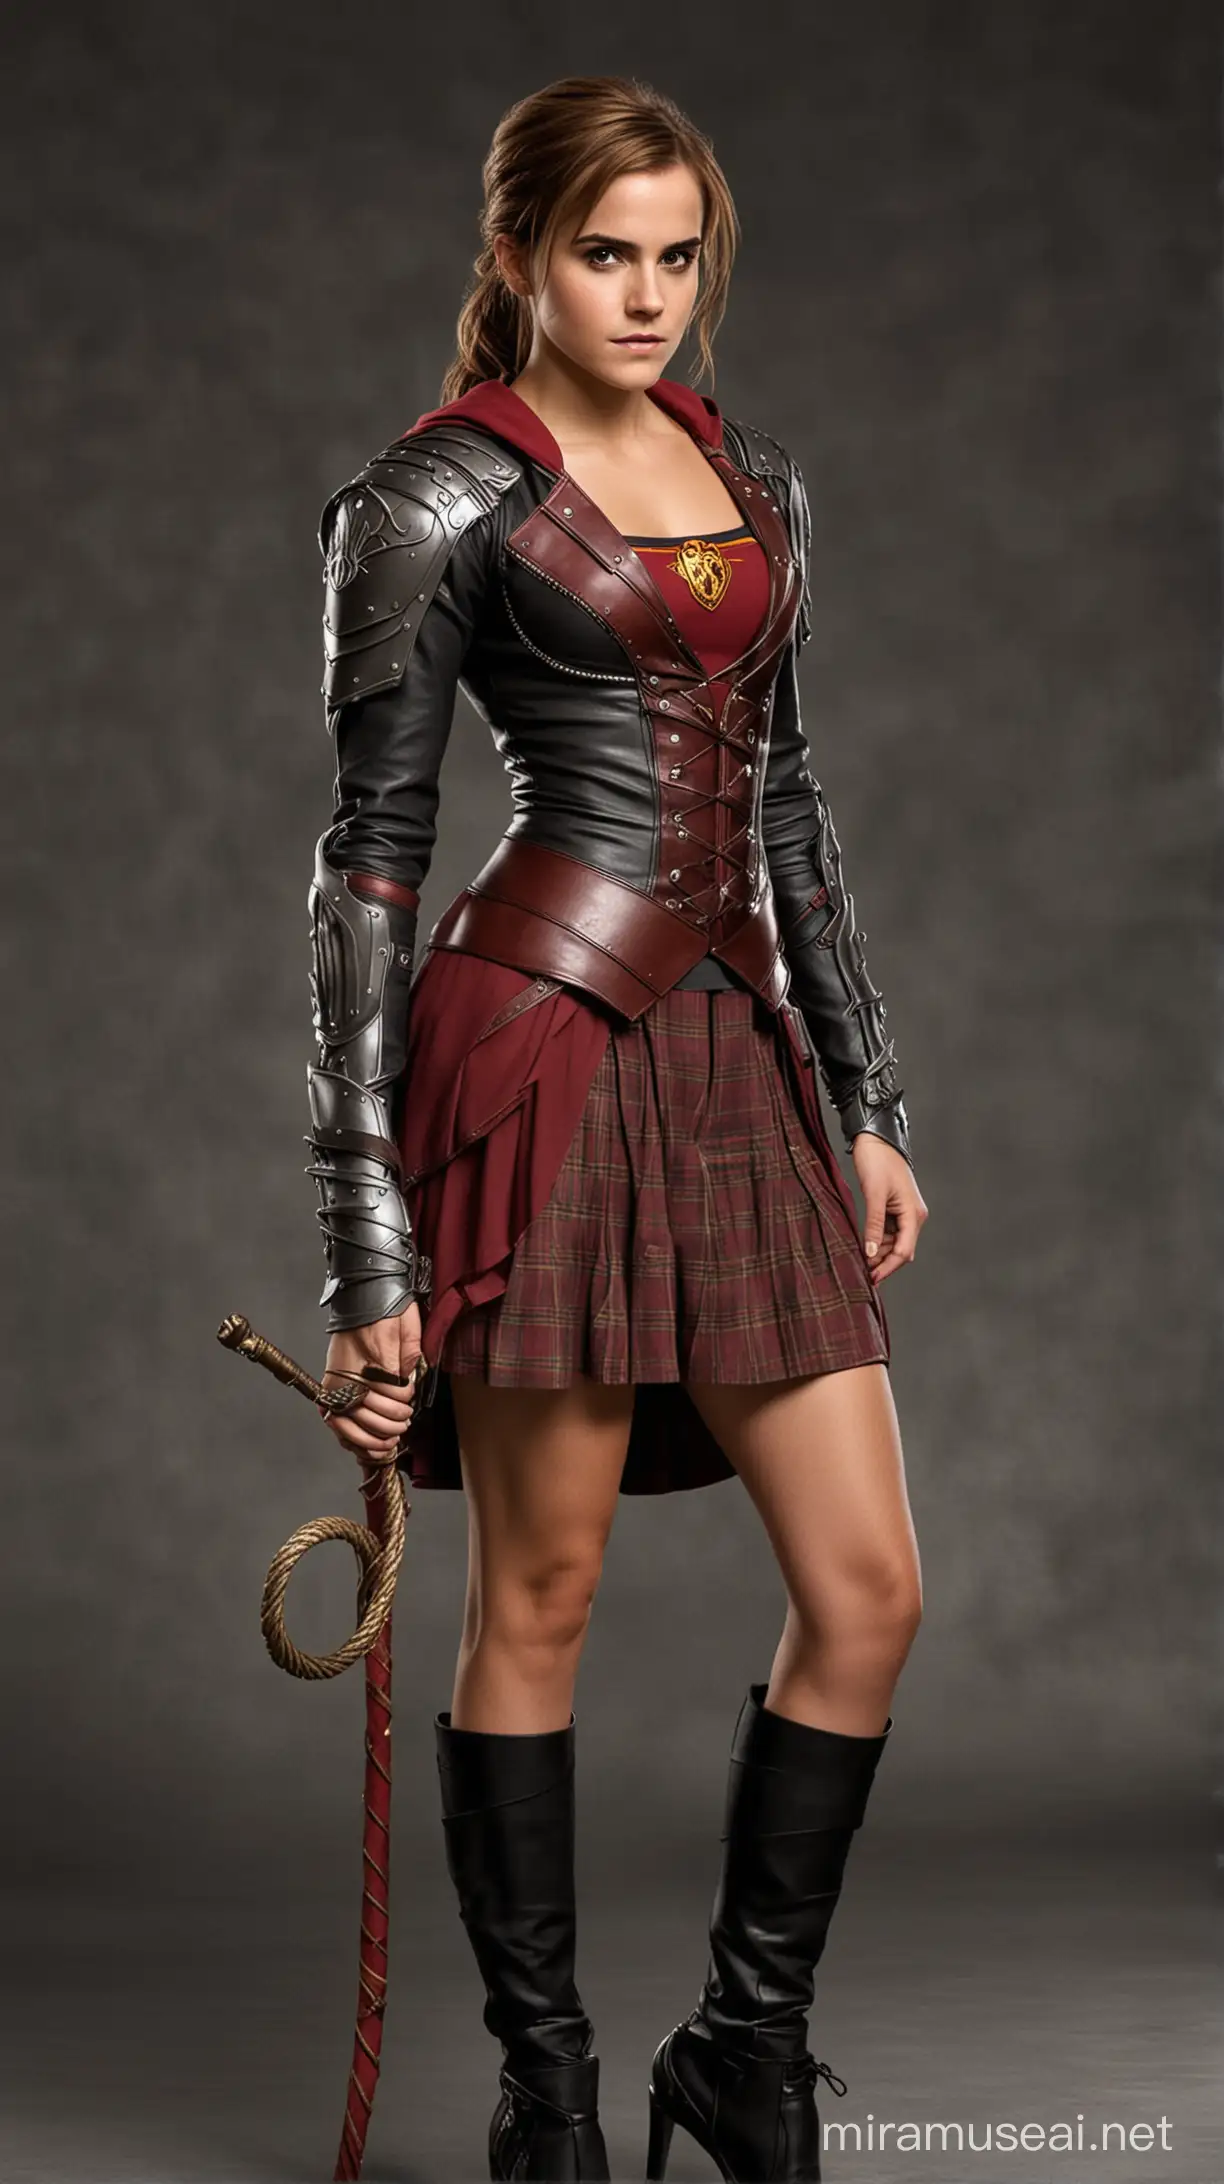 Emma Watson with muscles in a gryffindor bikiarmor, short skirt,  holding a bullwhip